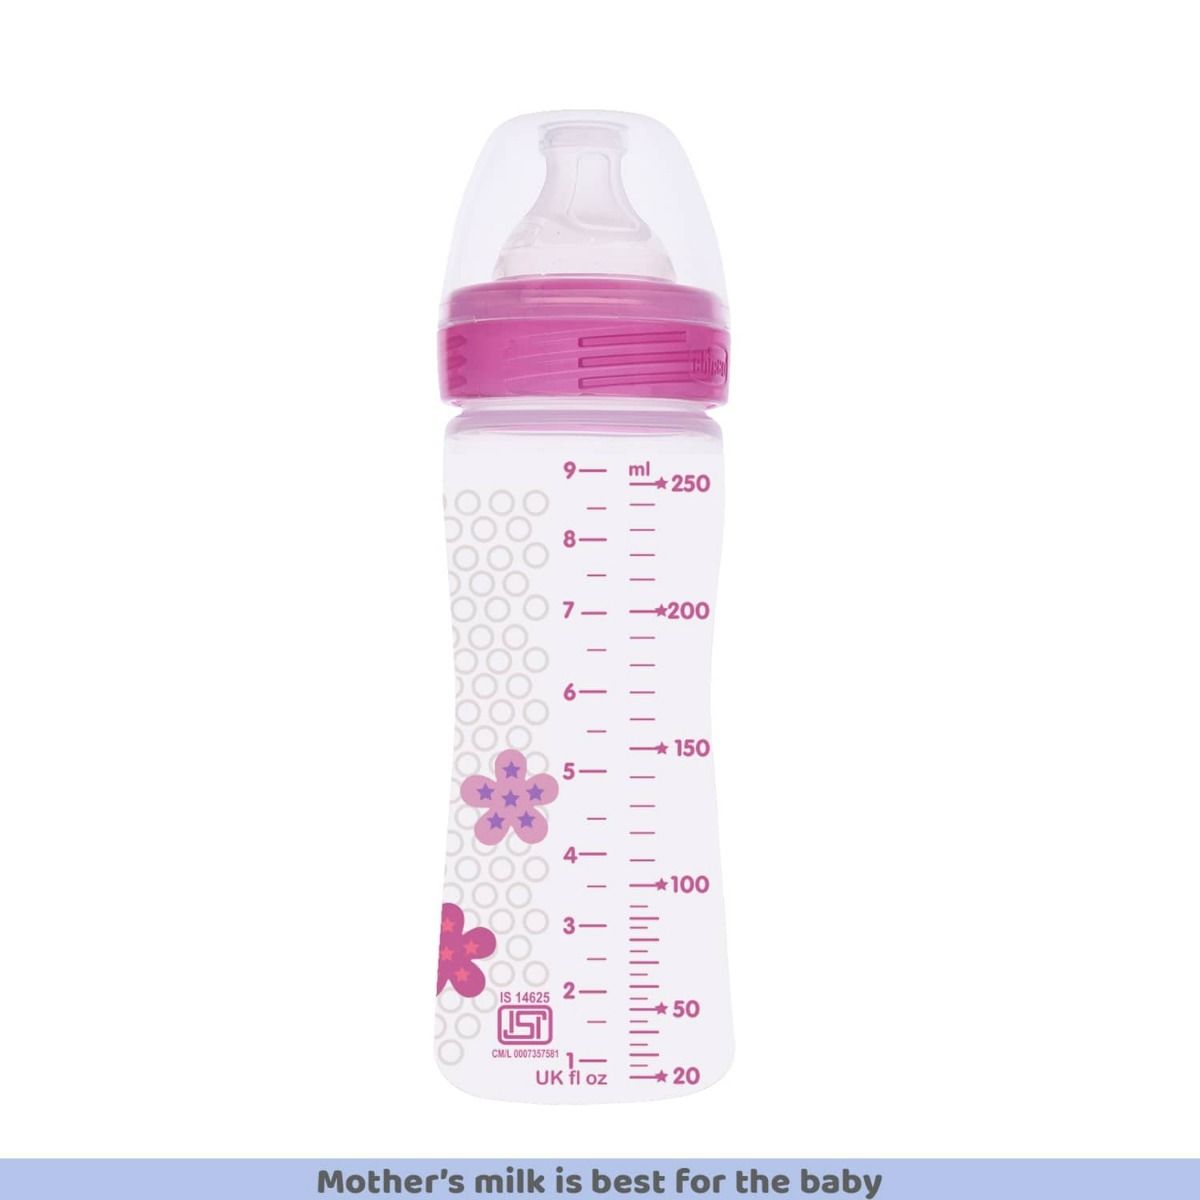 Chicco Well-Being Pink Feeding Bottle, 250 ml, Pack of 1 